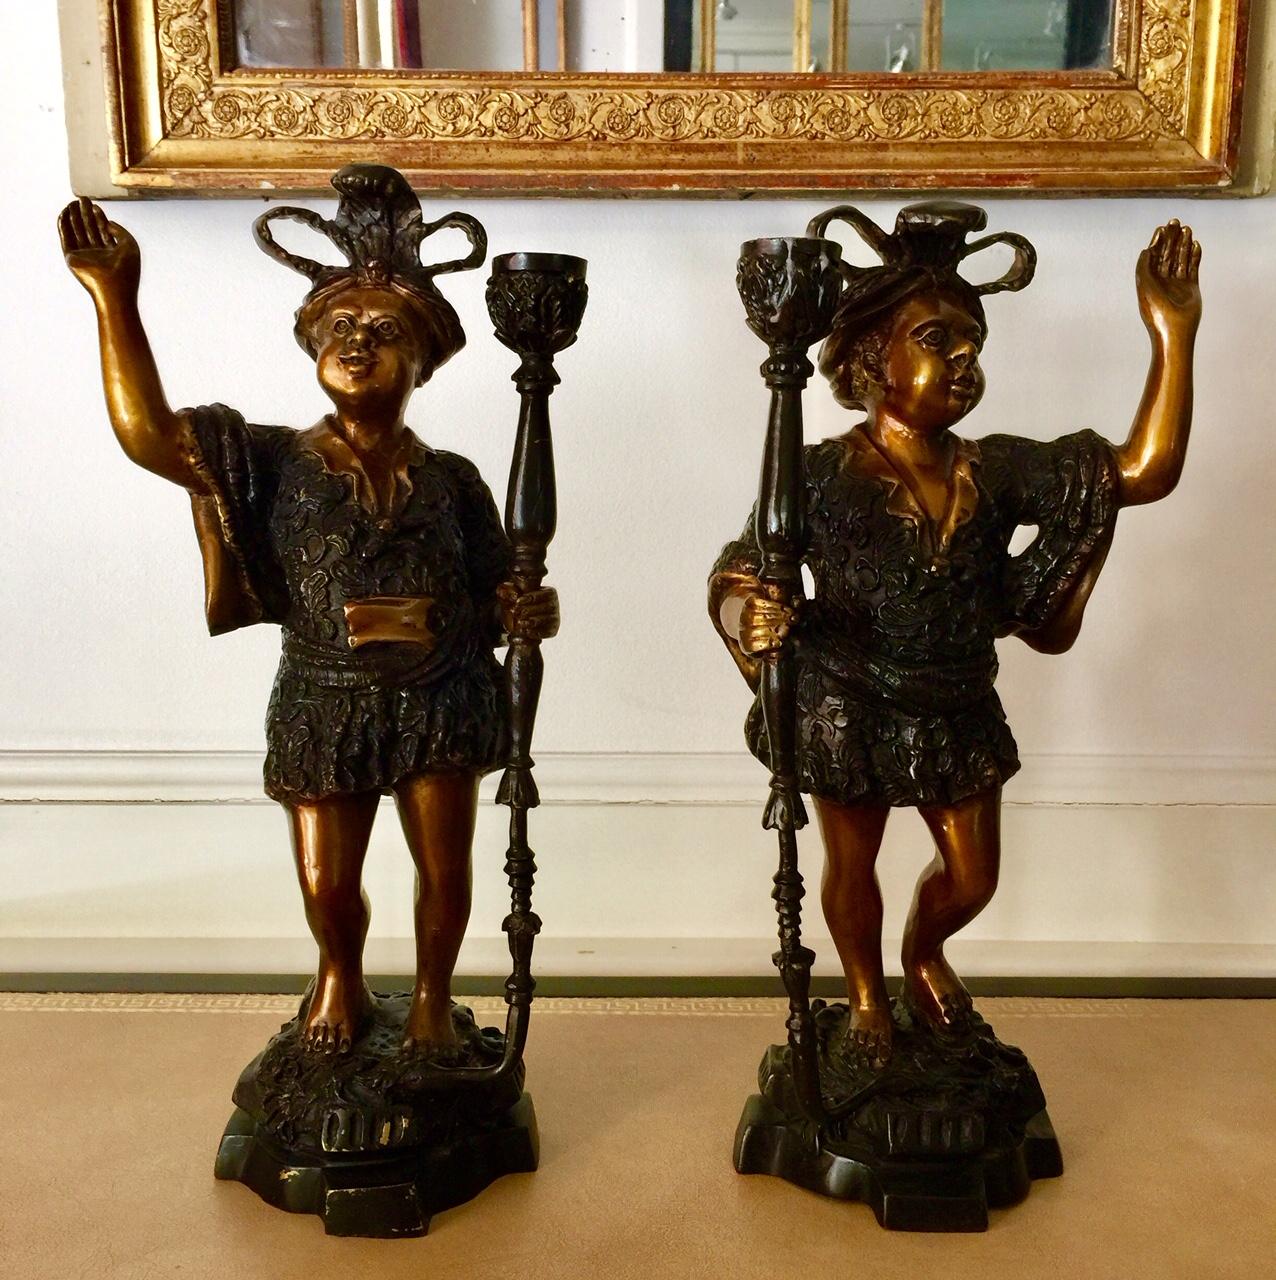 Pair of French two-toned patinated bronze Moorish inspired figure candleholders
Lovely and fun, these Moorish Inspired beckoning figures are adorned in extravagant plumed headdresses, decorated caftans and bear torches.